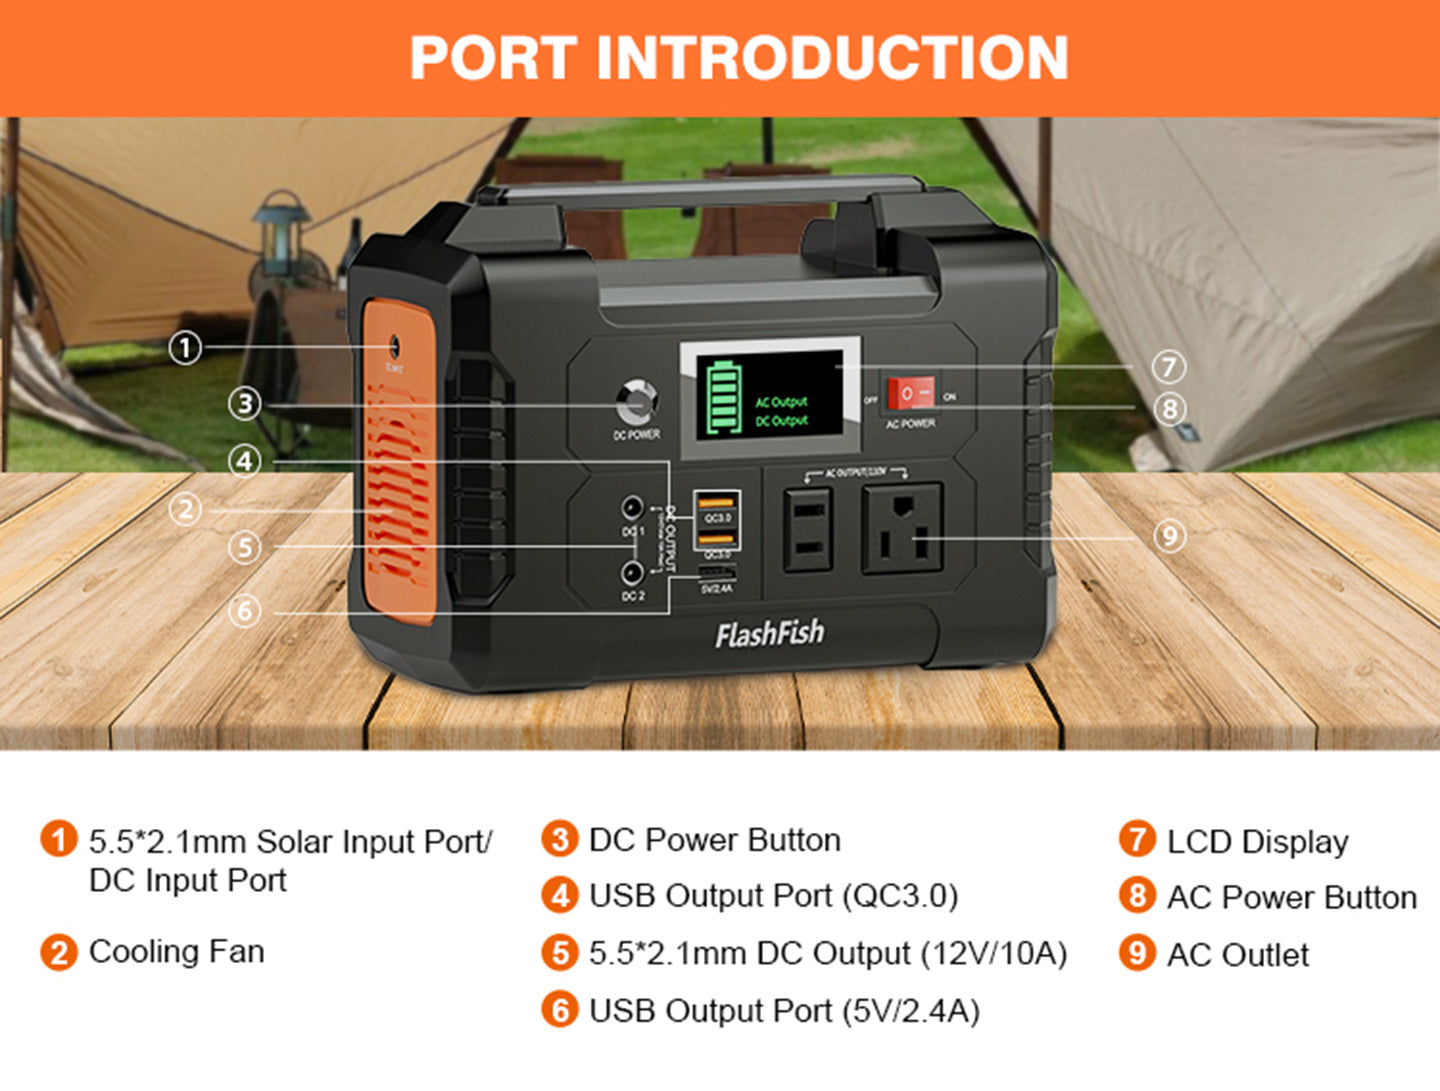 port introduction, portable power station, Flashfish e200, outdoor power supply, emergency power. 5.5*2.1mm solar input port/DC input port, Cooling fan, DC power button, USB output port (QC3.0), USB output port (5v/2.44A), LCD Display, AC Power Button, AC Outlet